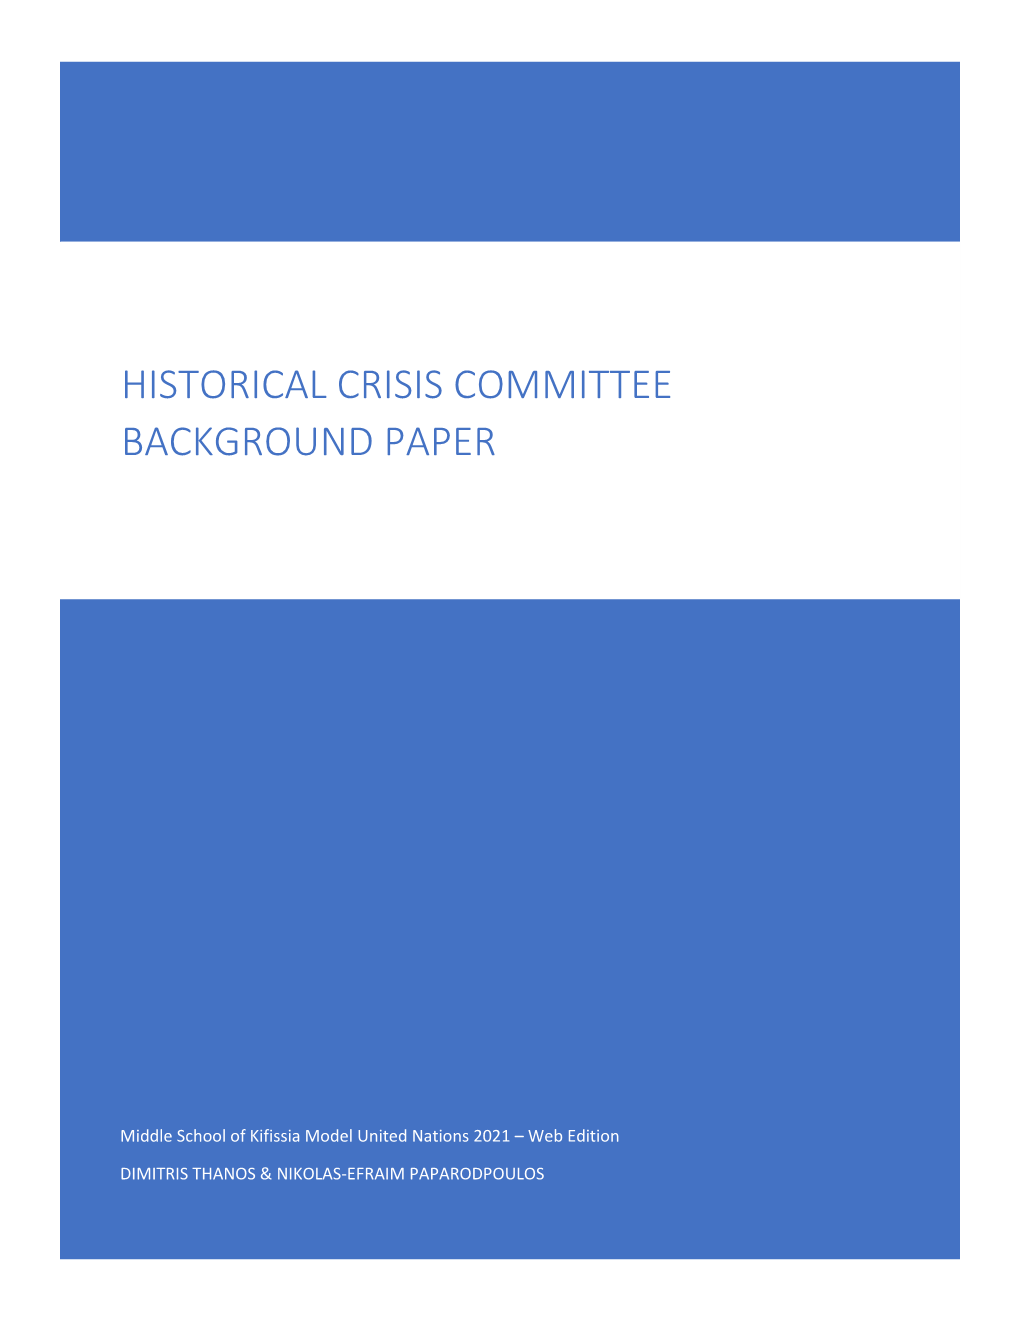 Historical Crisis Committee Background Paper